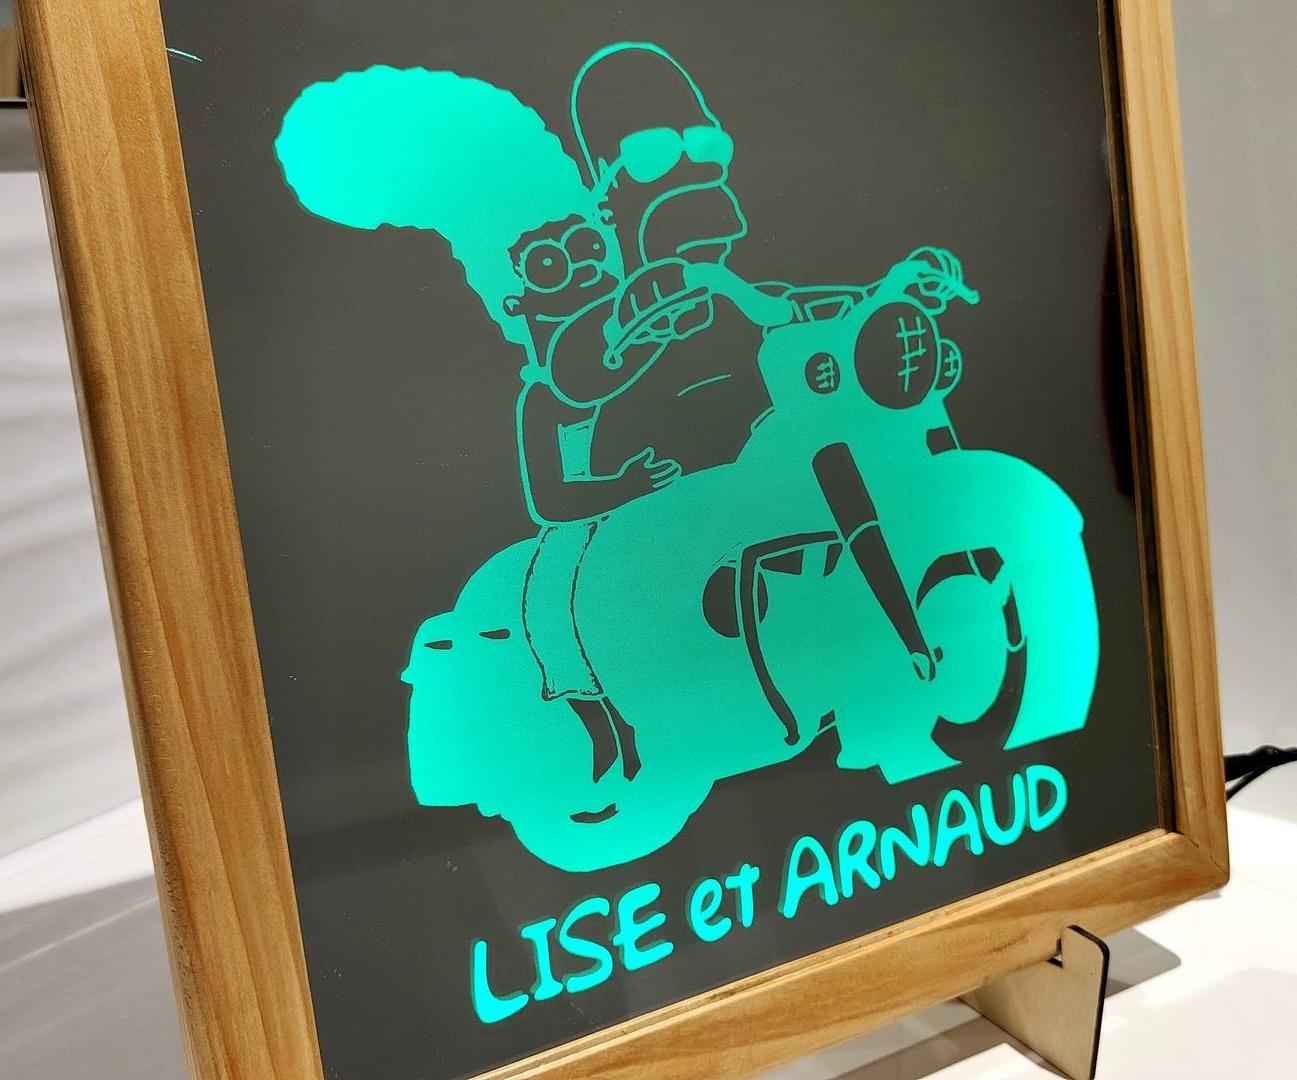 Laser-engraved Illuminated Mirror With Homer!